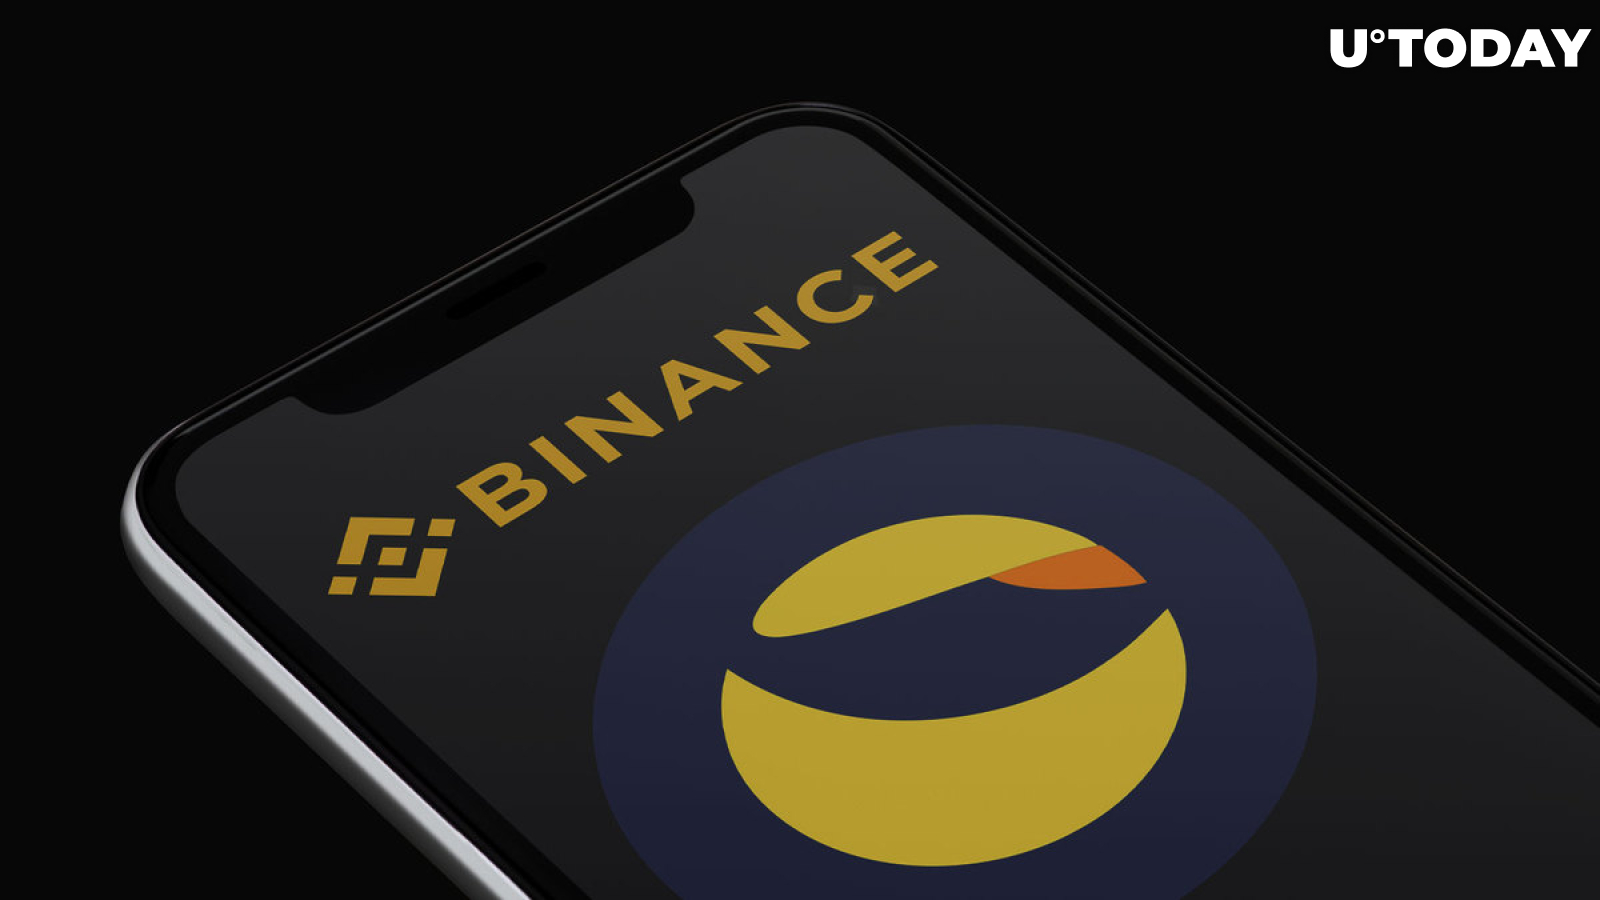 Binance's Withdrawal from Voyager Deal Sparks Speculation on CFTC Settlement